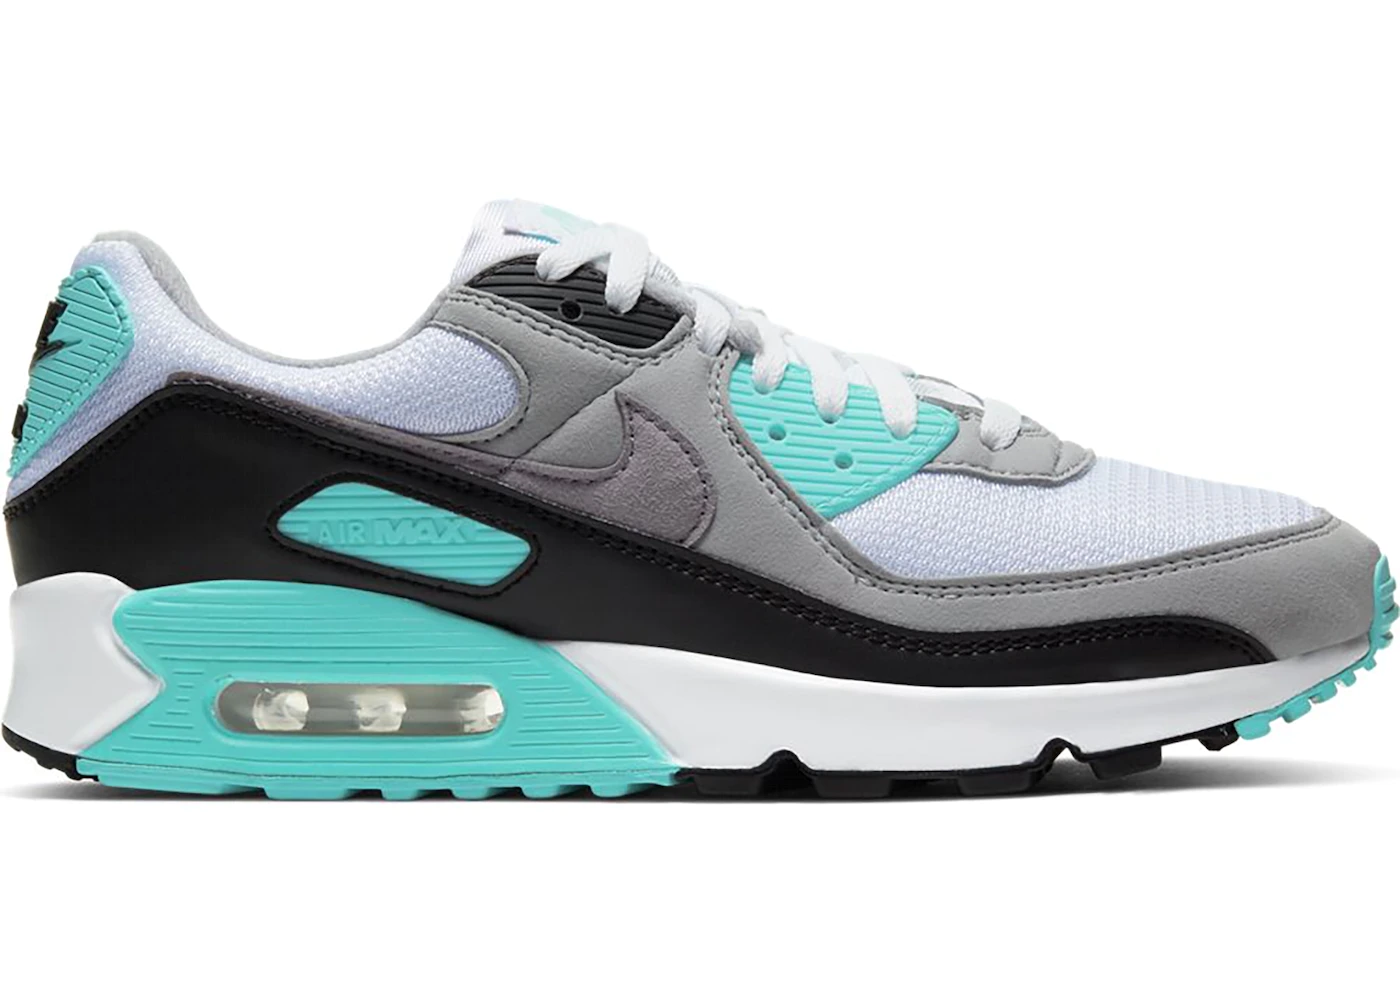 nike air max 90 homme turquoise زيادة التستيرون